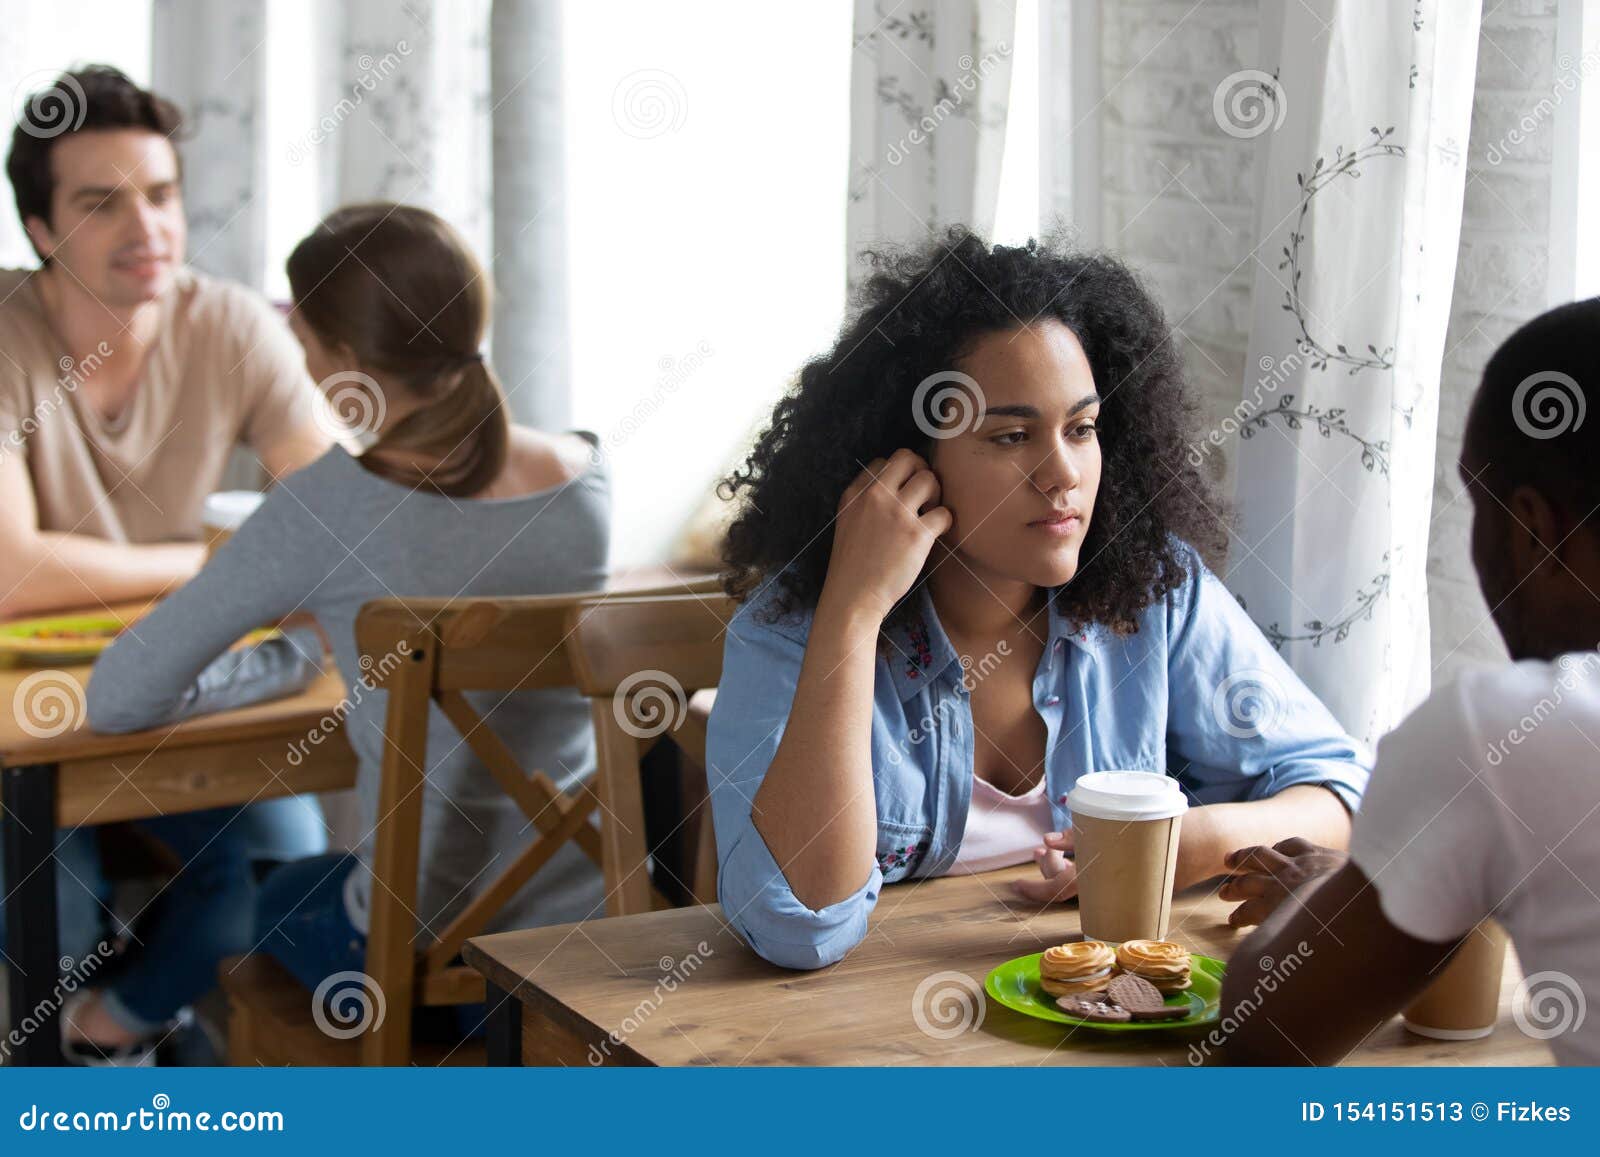 Young Biracial Woman Attending Speed Dating Event. Stock Image - Image ...